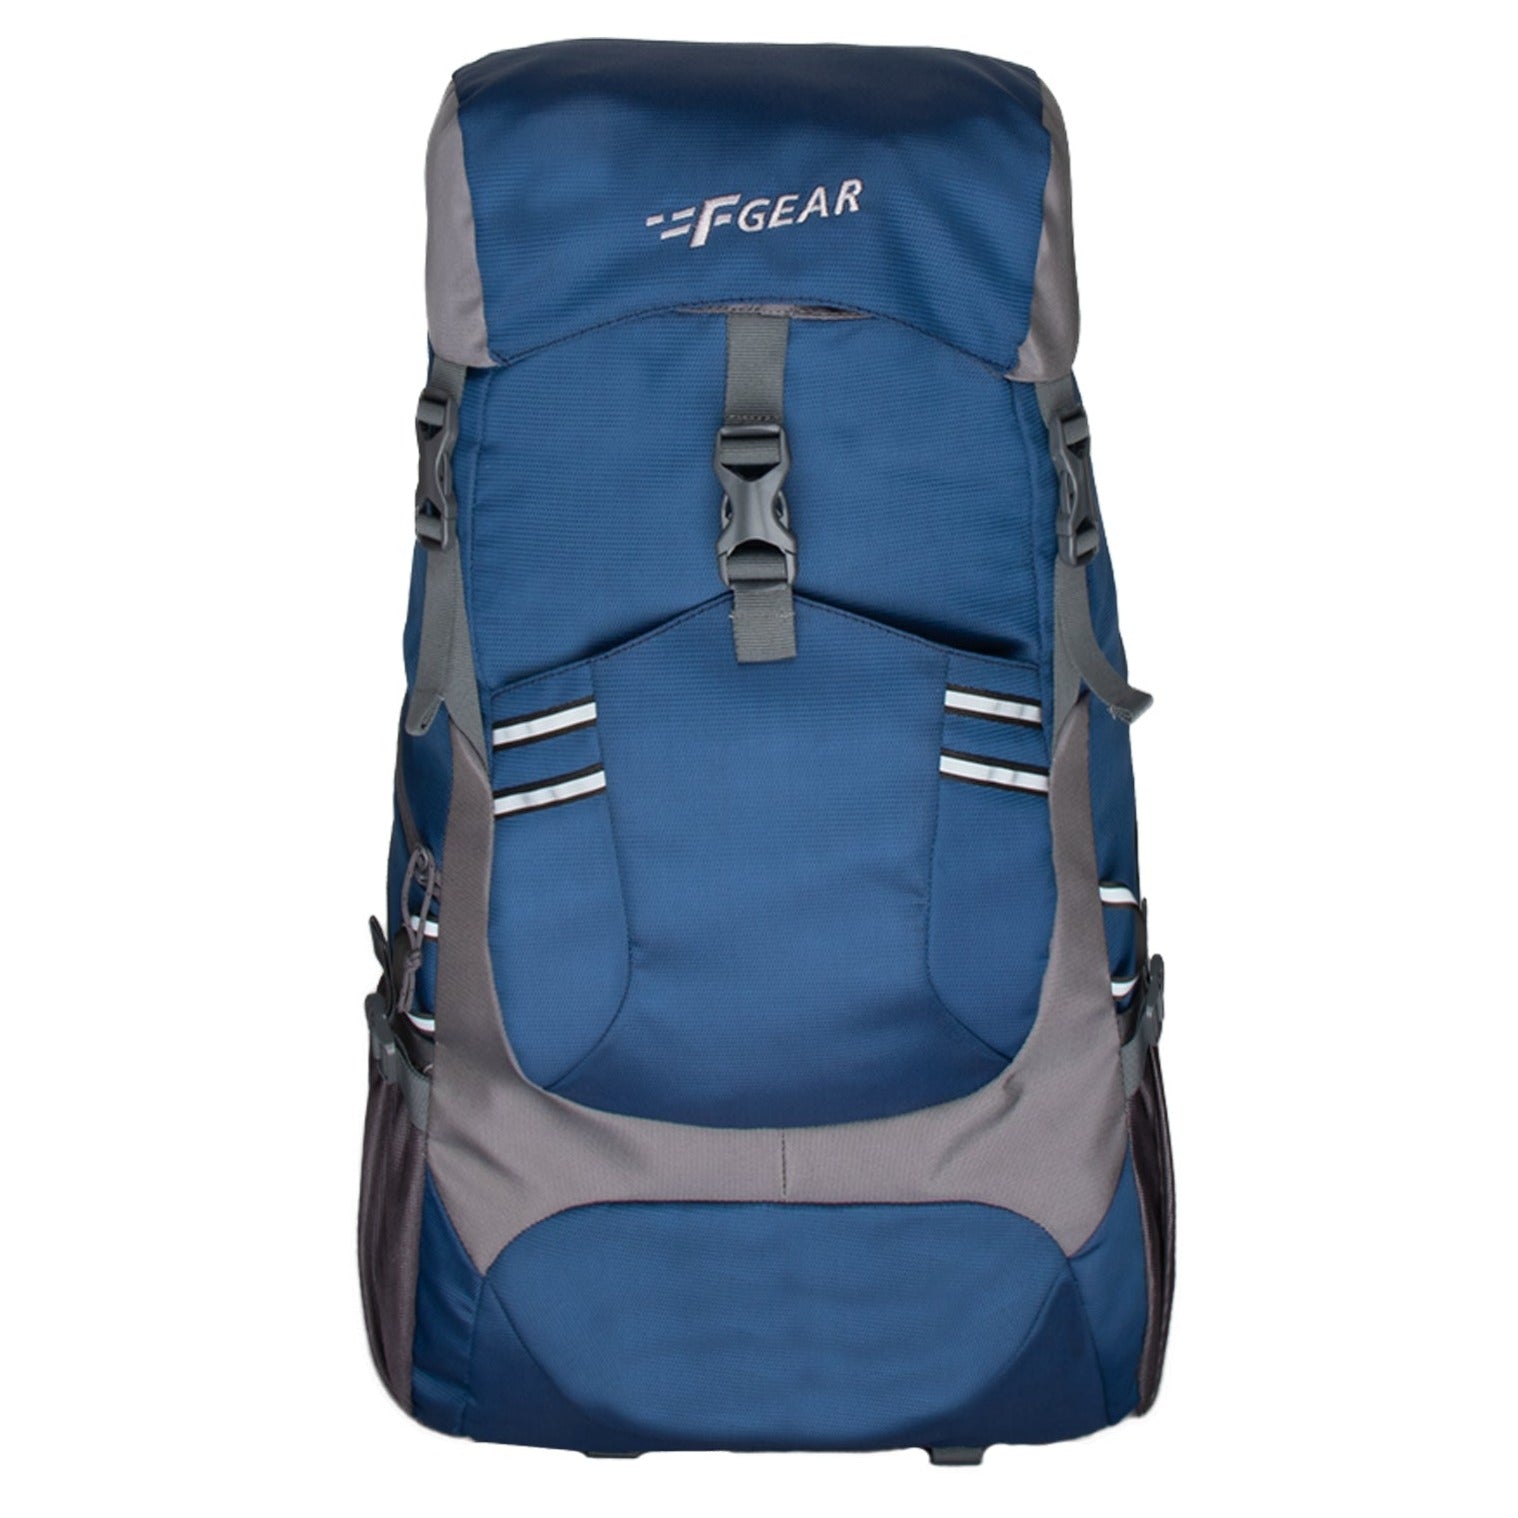 Buy Skybags 45 Ltrs Blue  Red Large Rucksack with Rain Cover Online At  Best Price  Tata CLiQ